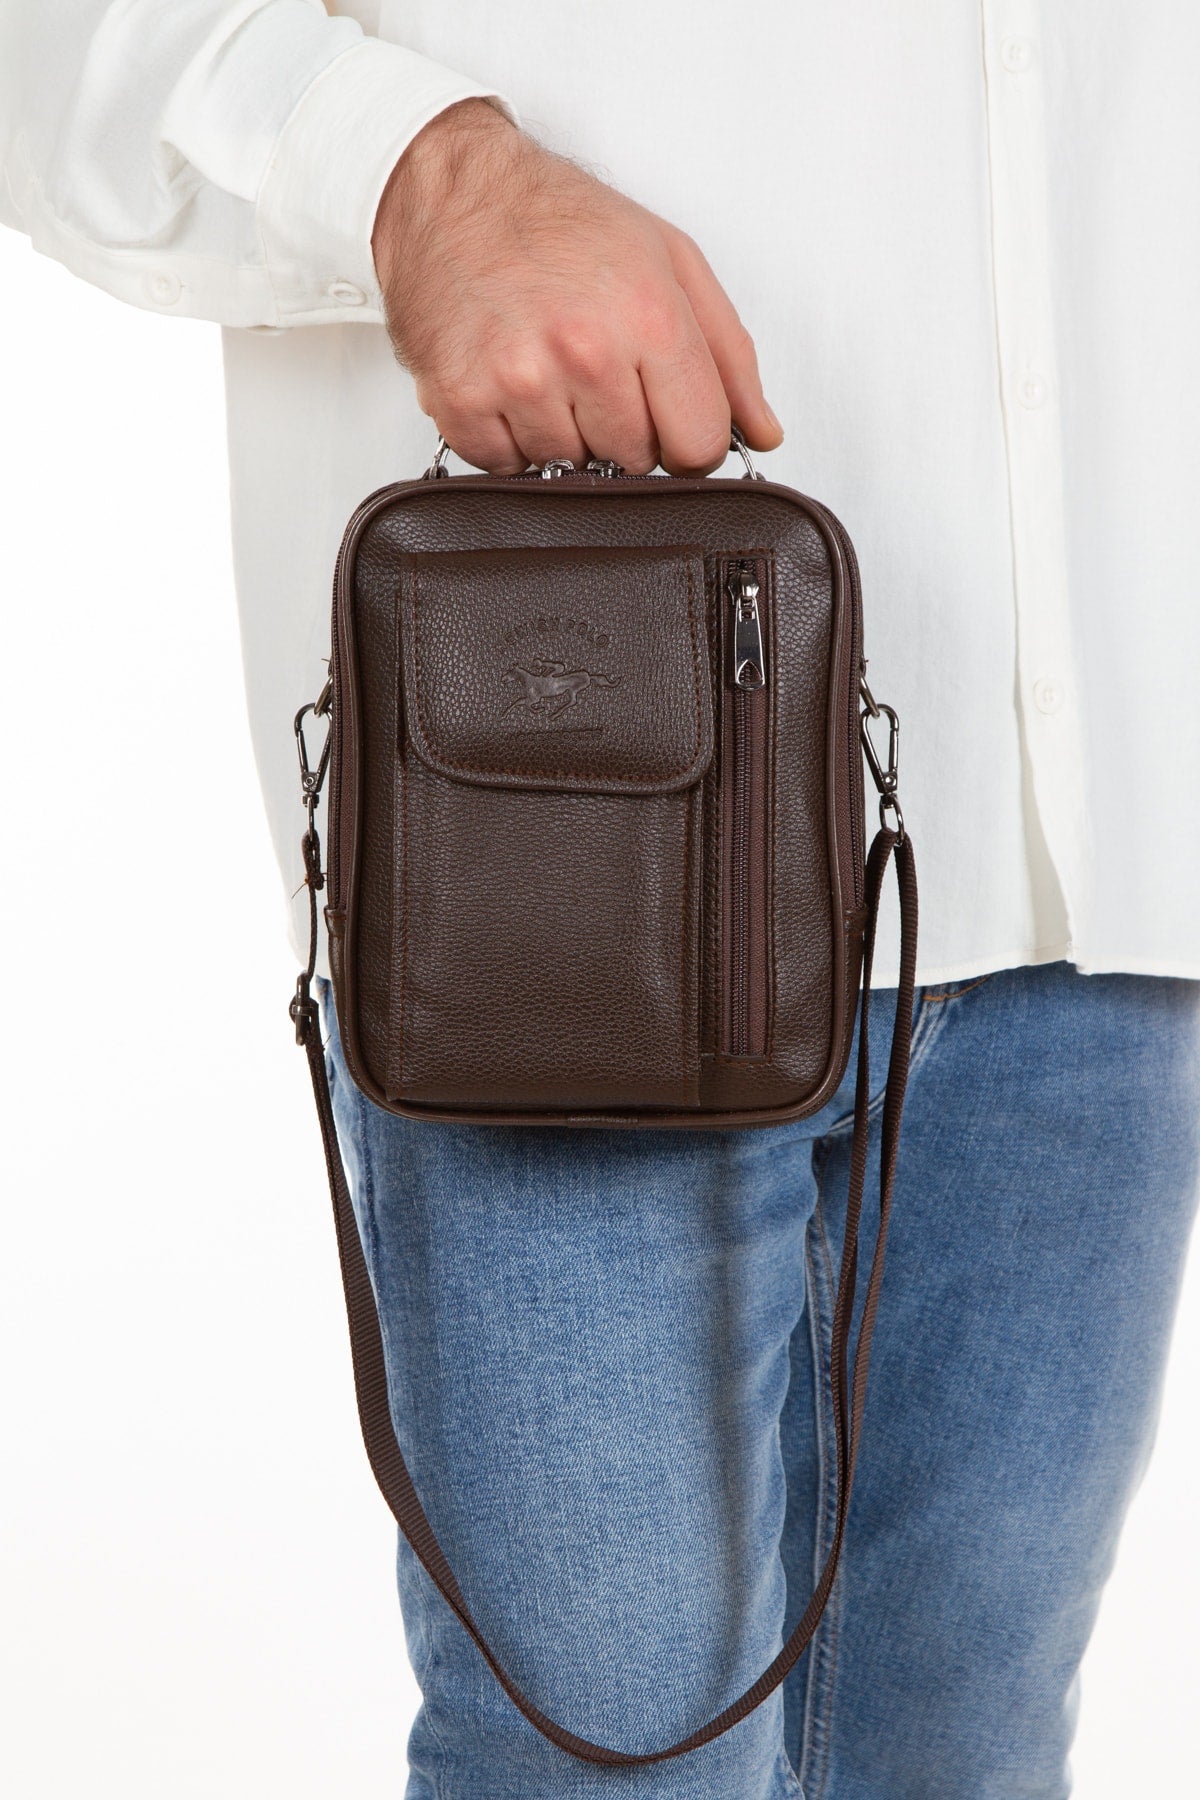 Dark Brown Leather Steel Case Hand And Shoulder Bag With Phone Compartment And Card Holder Wallet With Mechanism